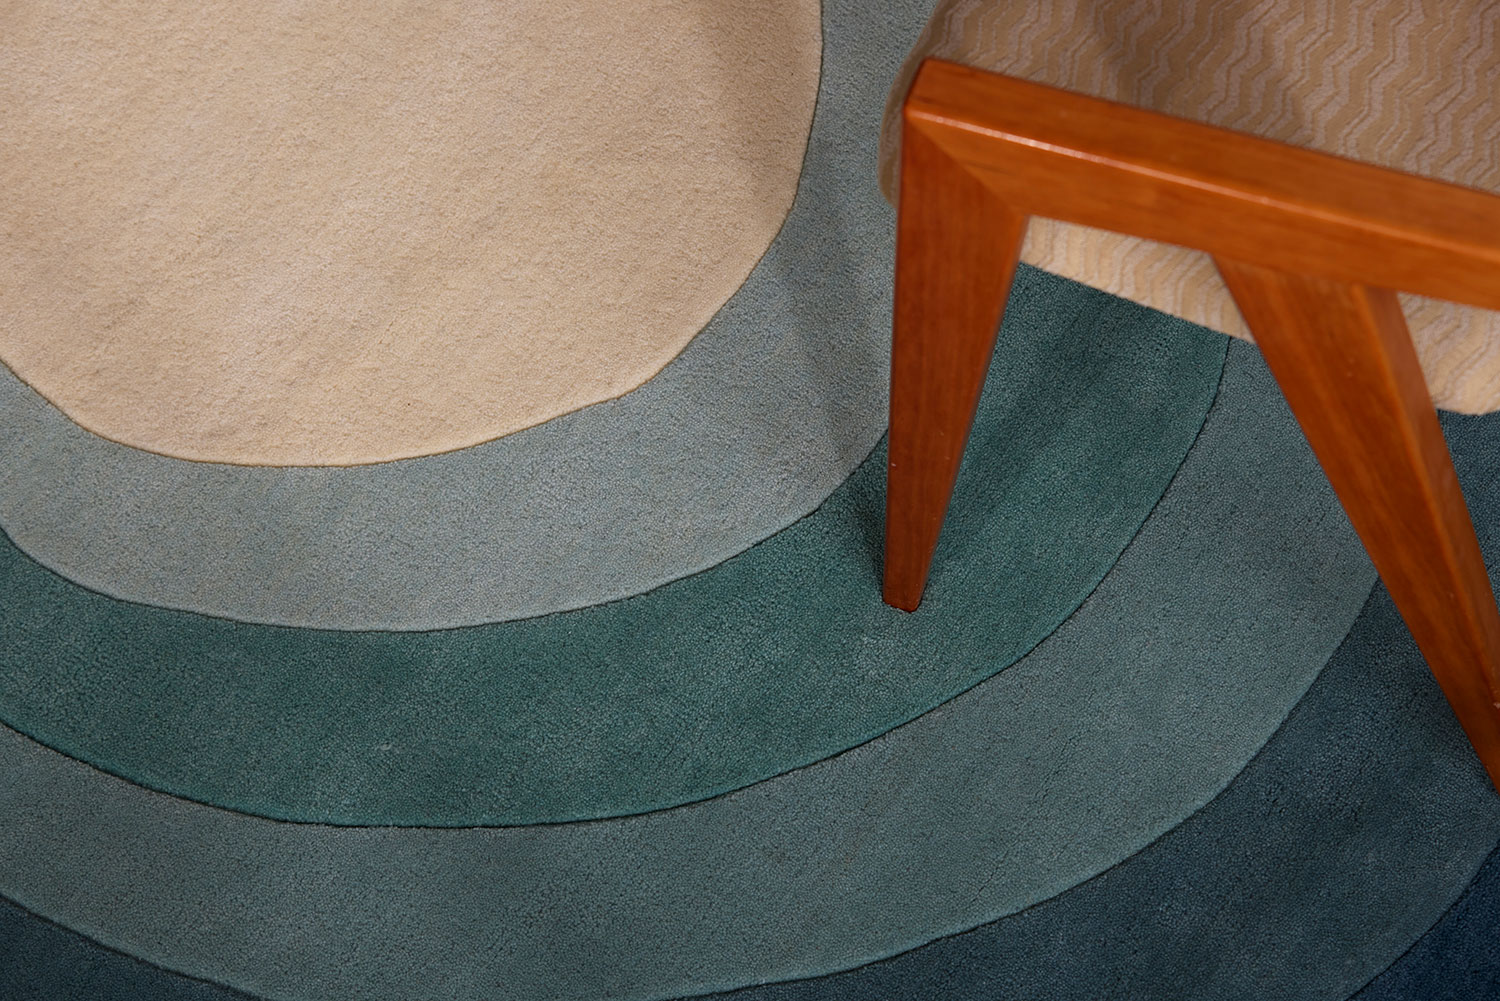 A close up of a blue gradient area rug called Pool Dream in the shape of a pool with a wooden chair on it.